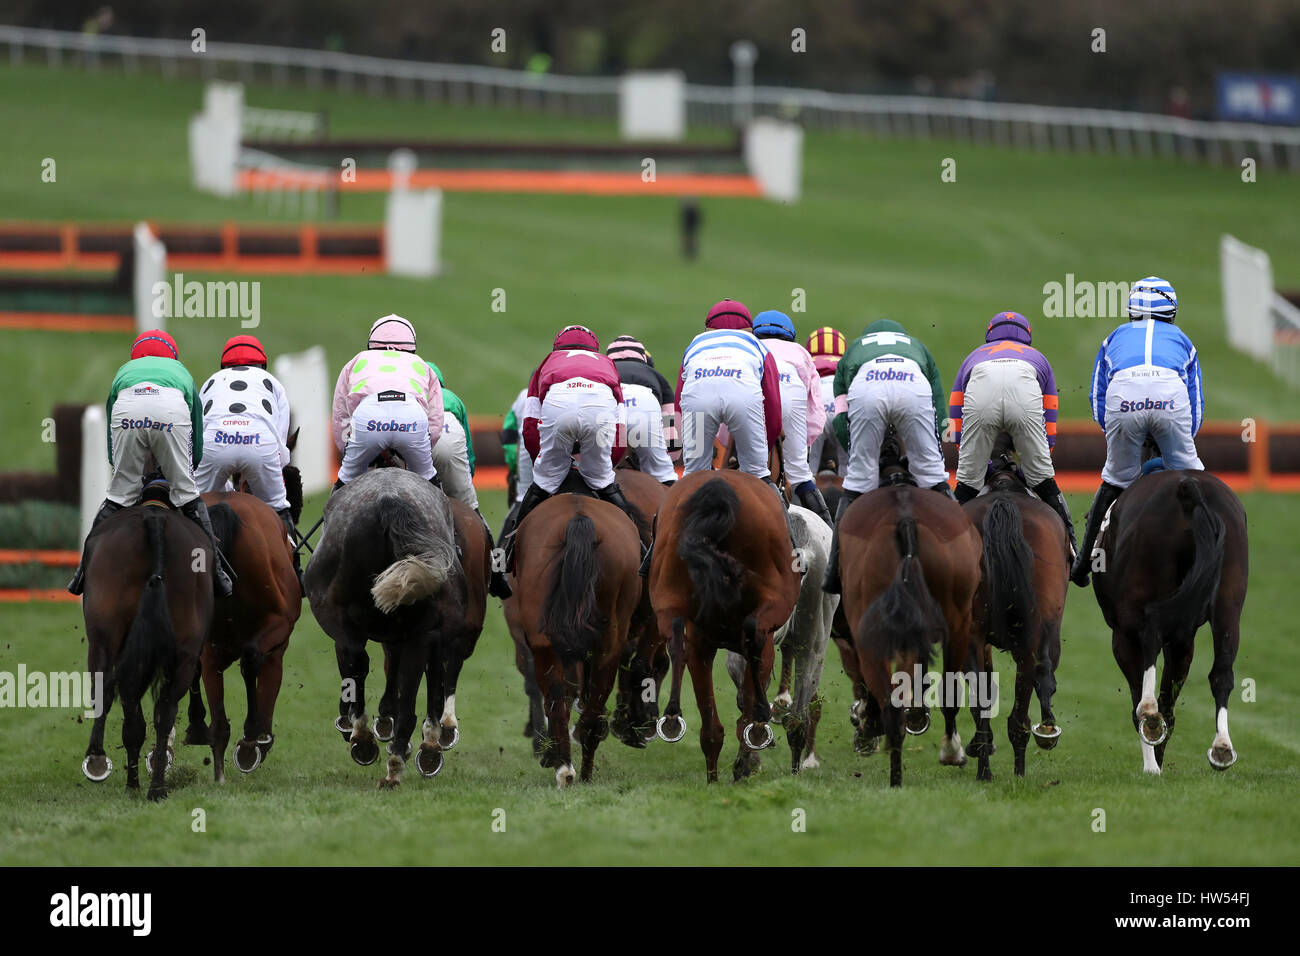 Runners and riders in the Albert Bartlett Novices' Hurdle during Gold Cup Day of the 2017 Cheltenham Festival at Cheltenham Racecourse. Stock Photo